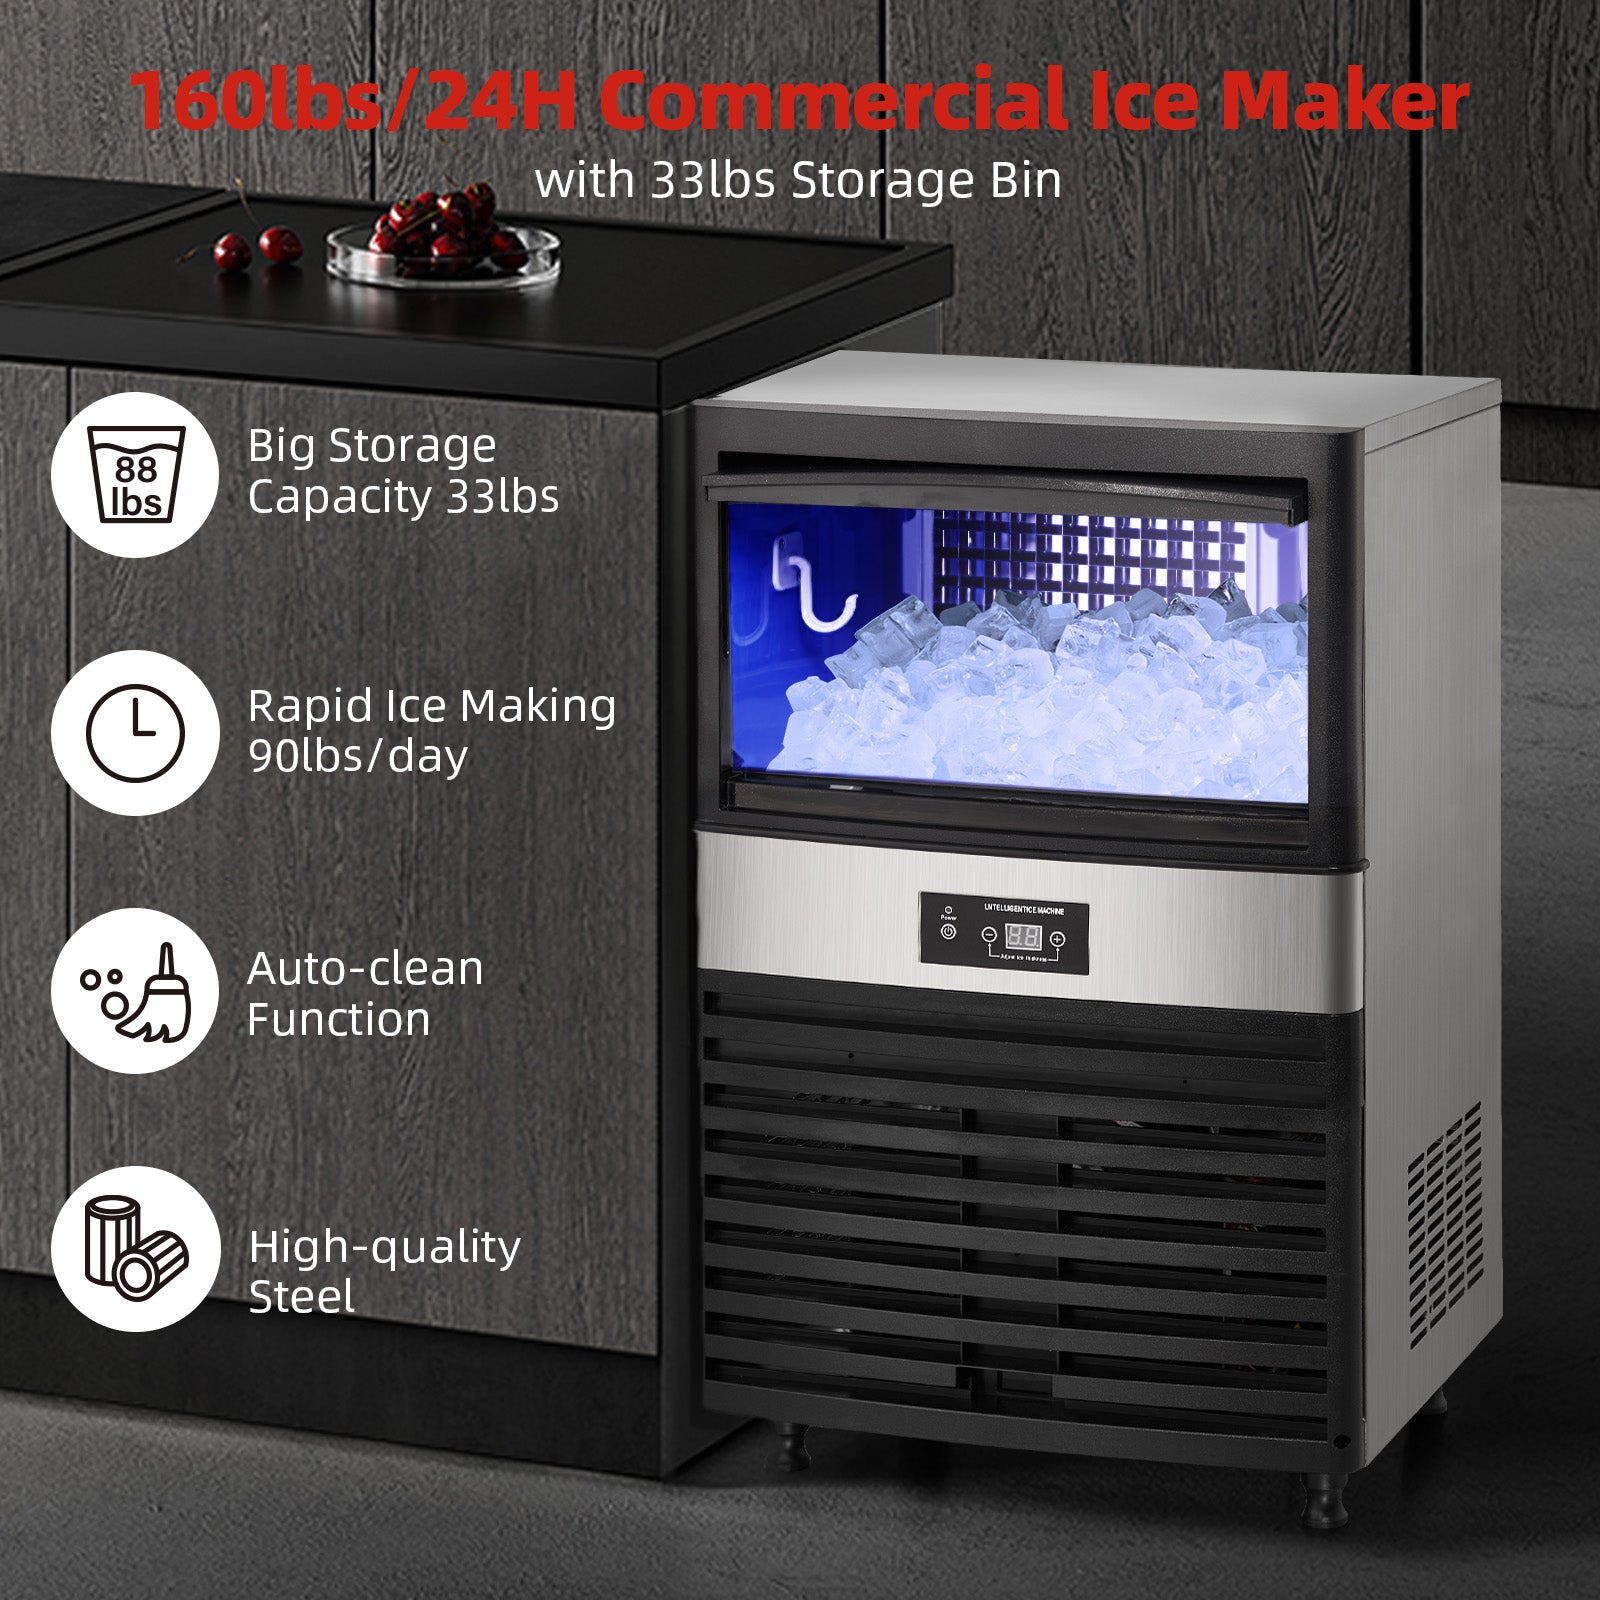 GARVEE 160lbs/24H Commercial Ice Maker Machine Stainless Steel Under Counter ice Machine with 44lbs Storage Freestanding Ice Maker for Home Business